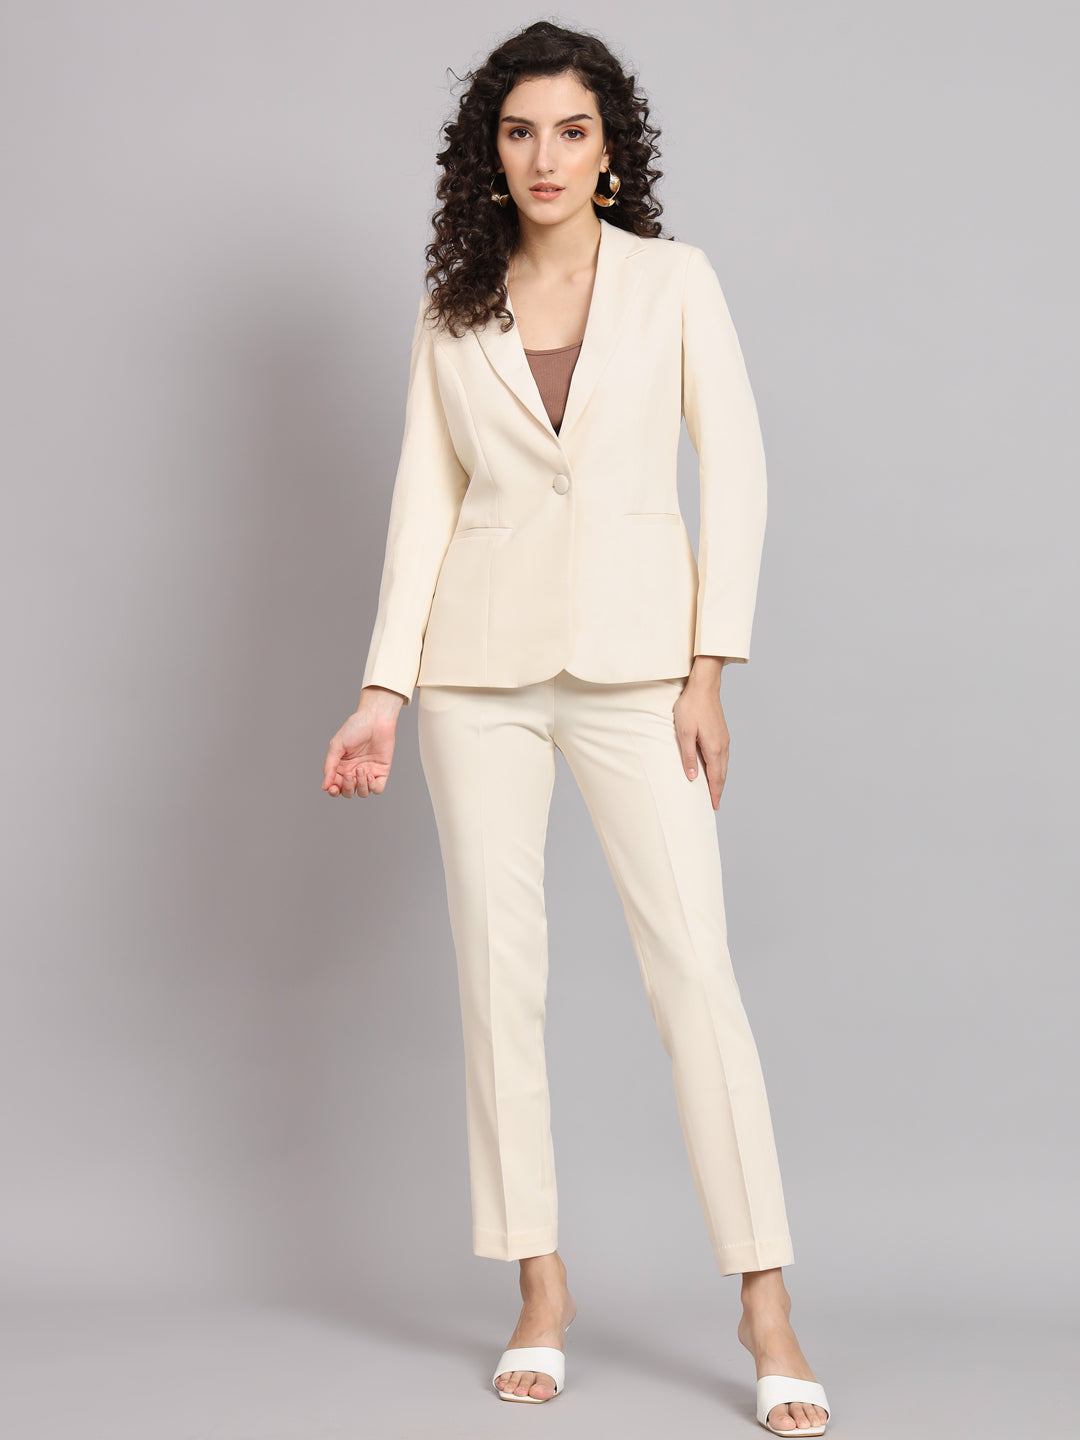  Womens Dressy Pant Suits Business Casual Two Piece Sets Open  Front Blazer and Work Suit Pants Sets Professional Outfits : Clothing,  Shoes & Jewelry